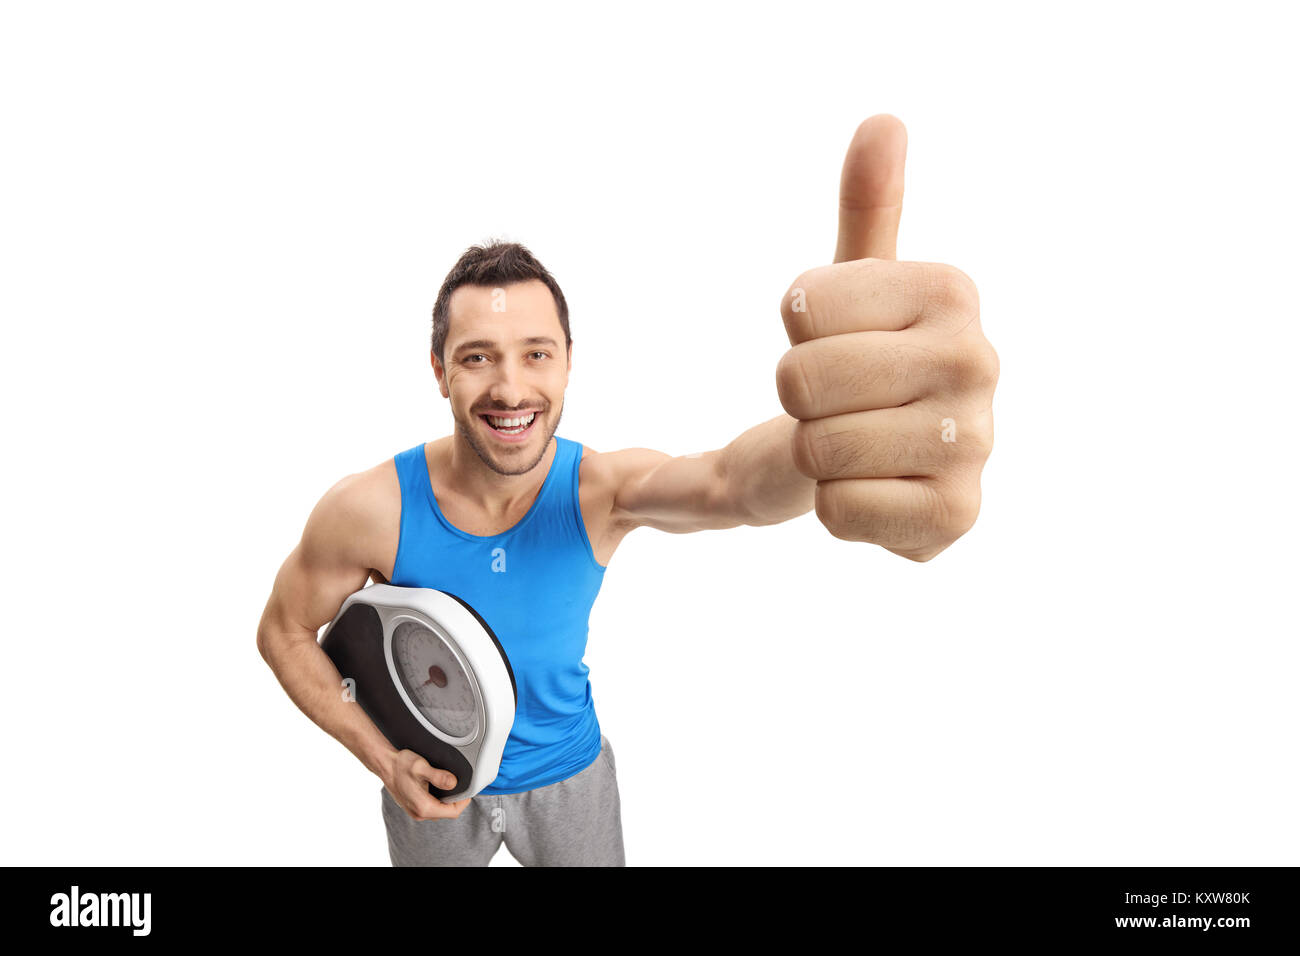 Young man in sportswear holding a weight scale and making a thumb up gesture isolated on white background Stock Photo